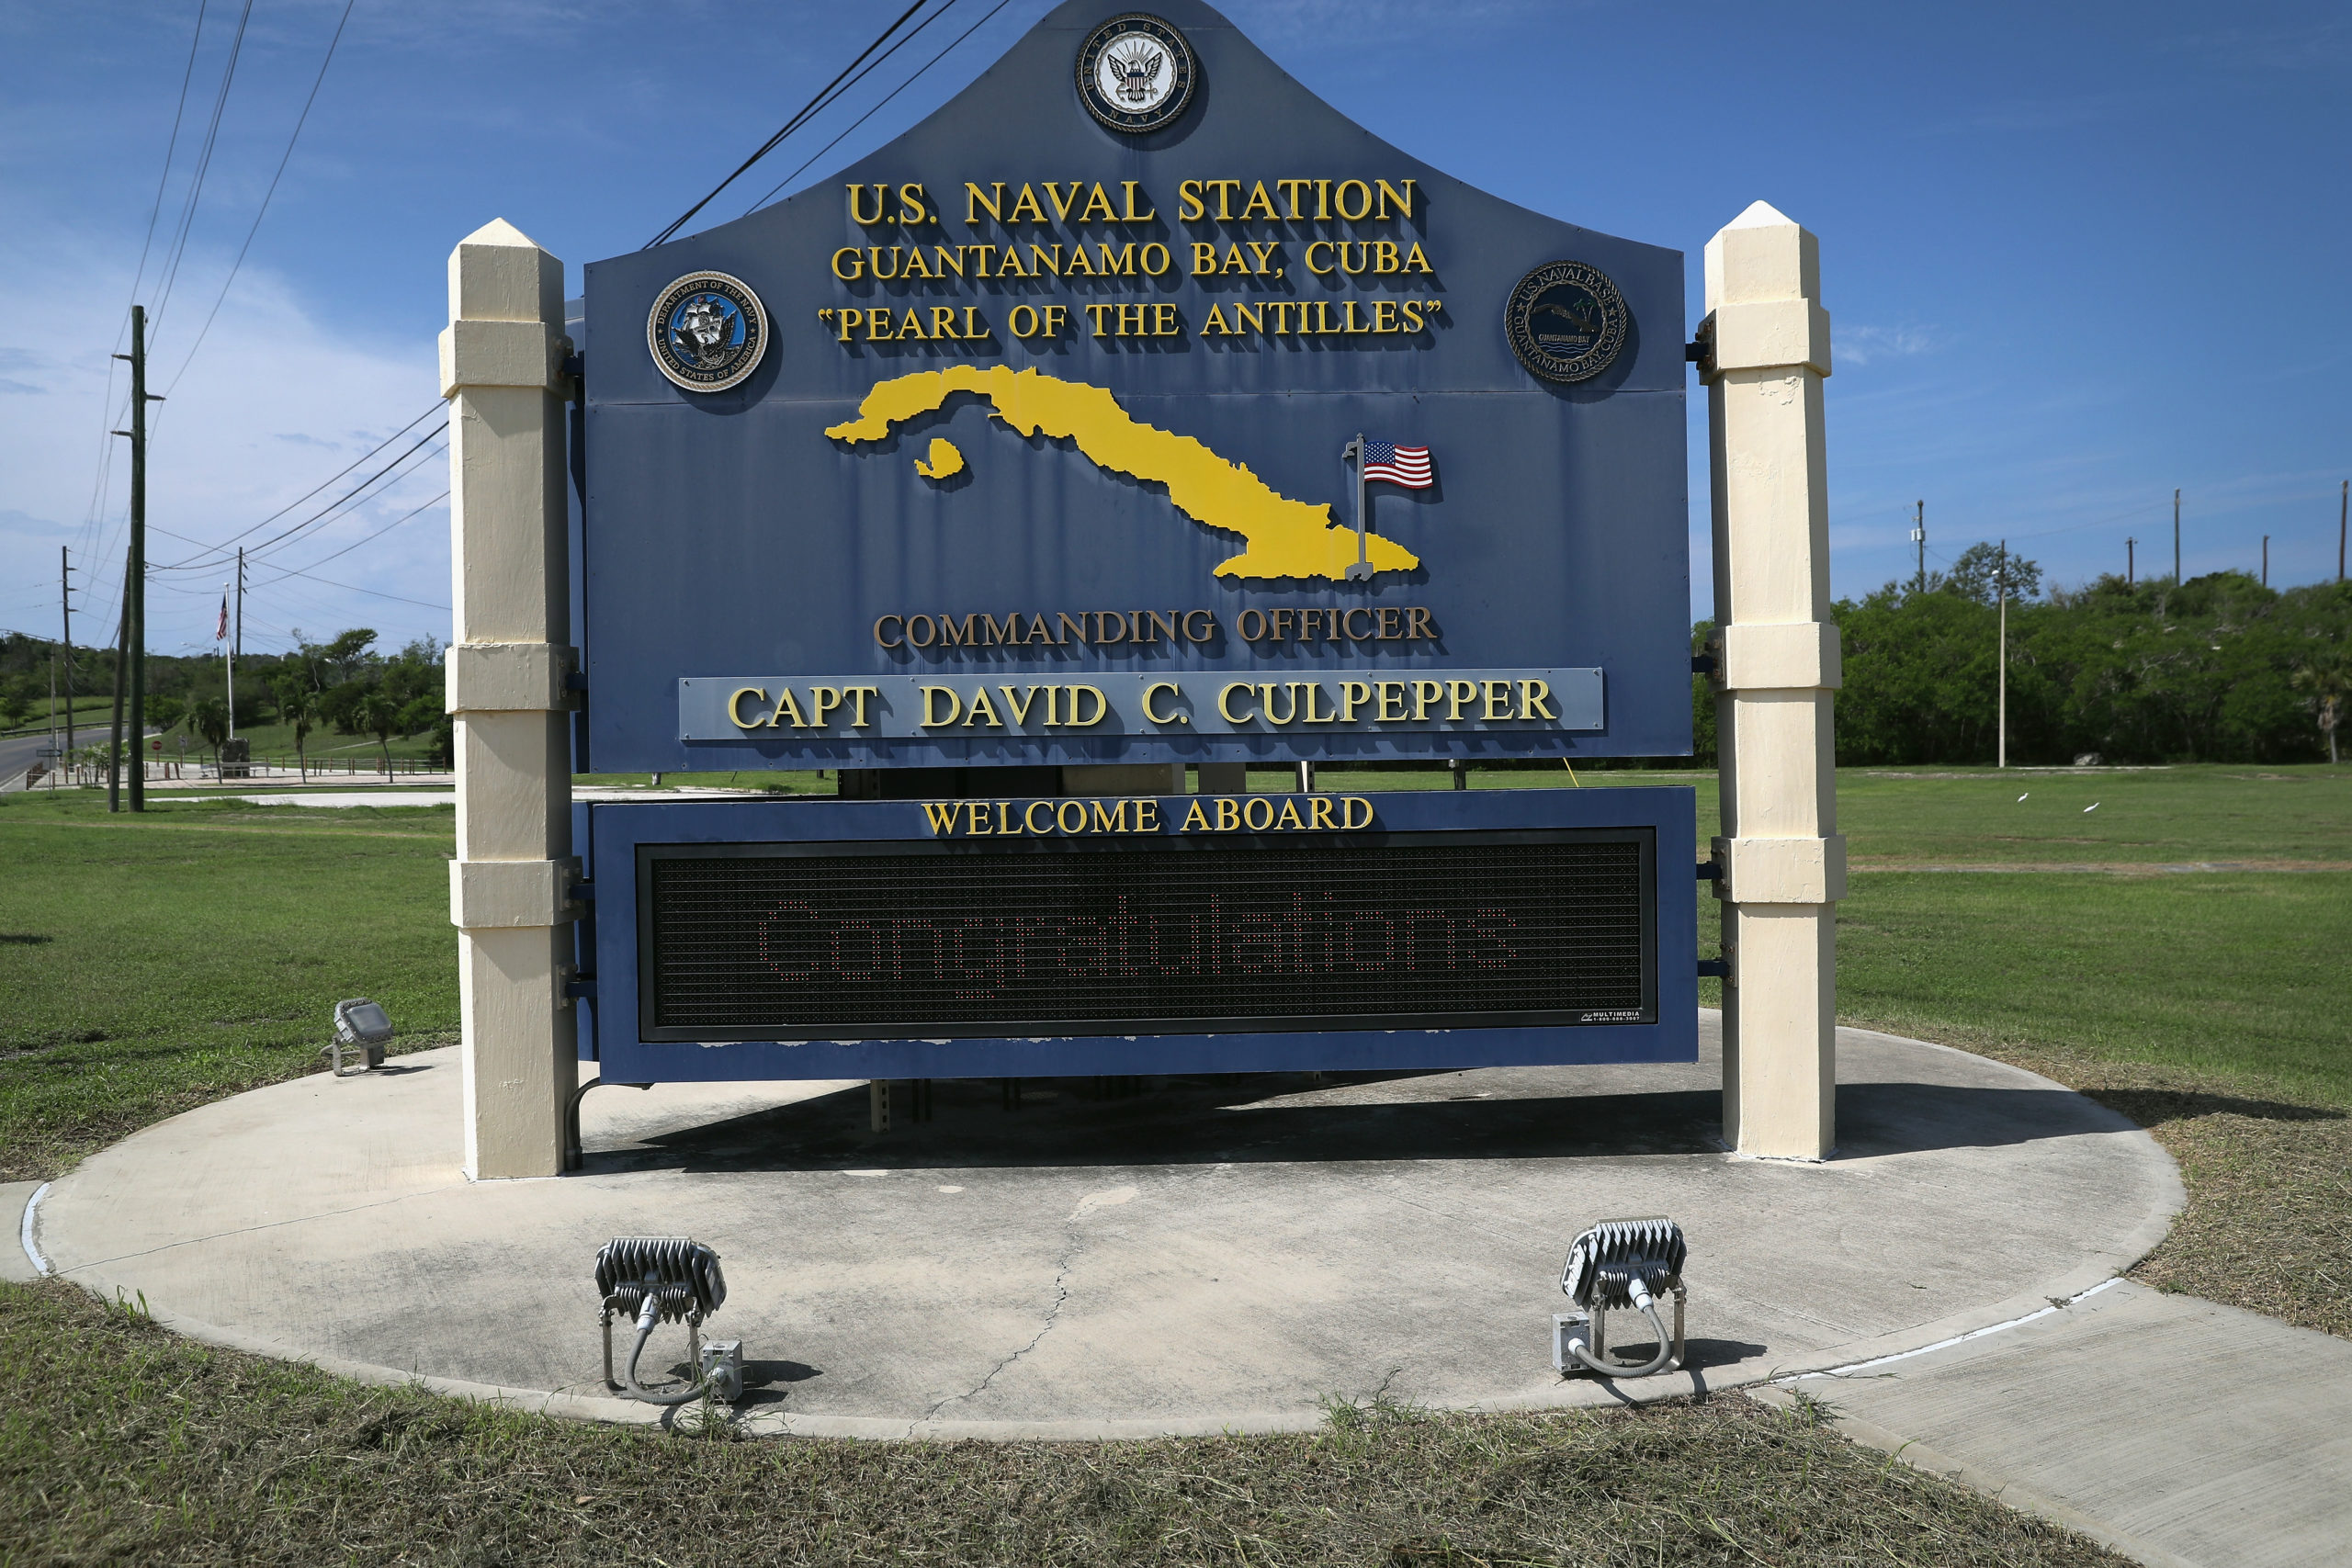 GUANTANAMO BAY, CUBA - OCTOBER 23: (EDITORS NOTE: Image has been reviewed by the U.S. Military prior to transmission.) A sign welcomes military personnel to the U.S. Naval Station at Guantanamo Bay, also known as Gitmo on October 23, 2016 at Guantanamo Bay, Cuba. The U.S. military's Joint Task Force Guantanamo is holding 60 detainees at the U.S. prison, located on the naval base, down from a previous total of 780. In 2008 President Obama issued an executive order to close the prison, which has failed because of political opposition in the U.S. (Photo by John Moore/Getty Images)